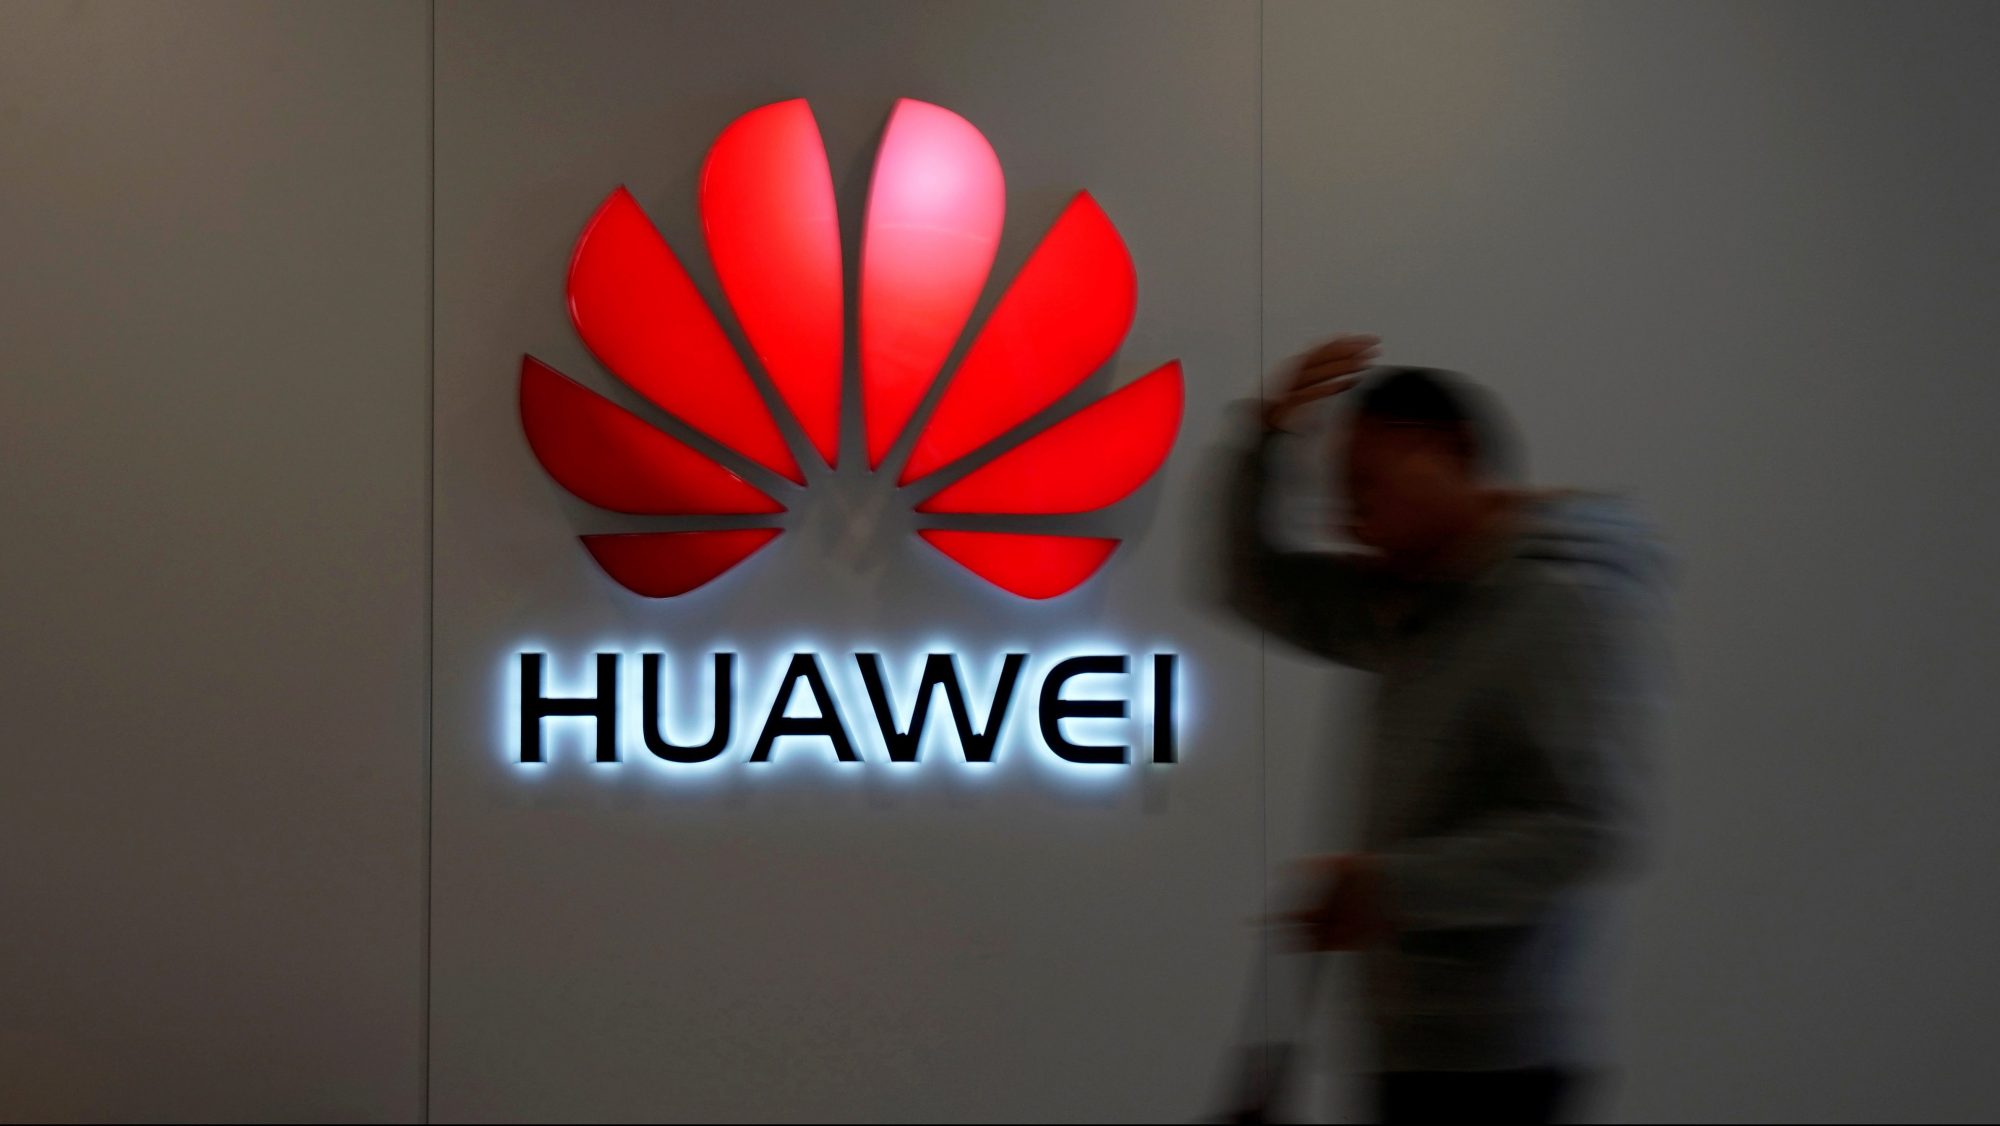 Huawei’s 2019 revenue to jump 18%, forecasts ‘difficult’ 2020